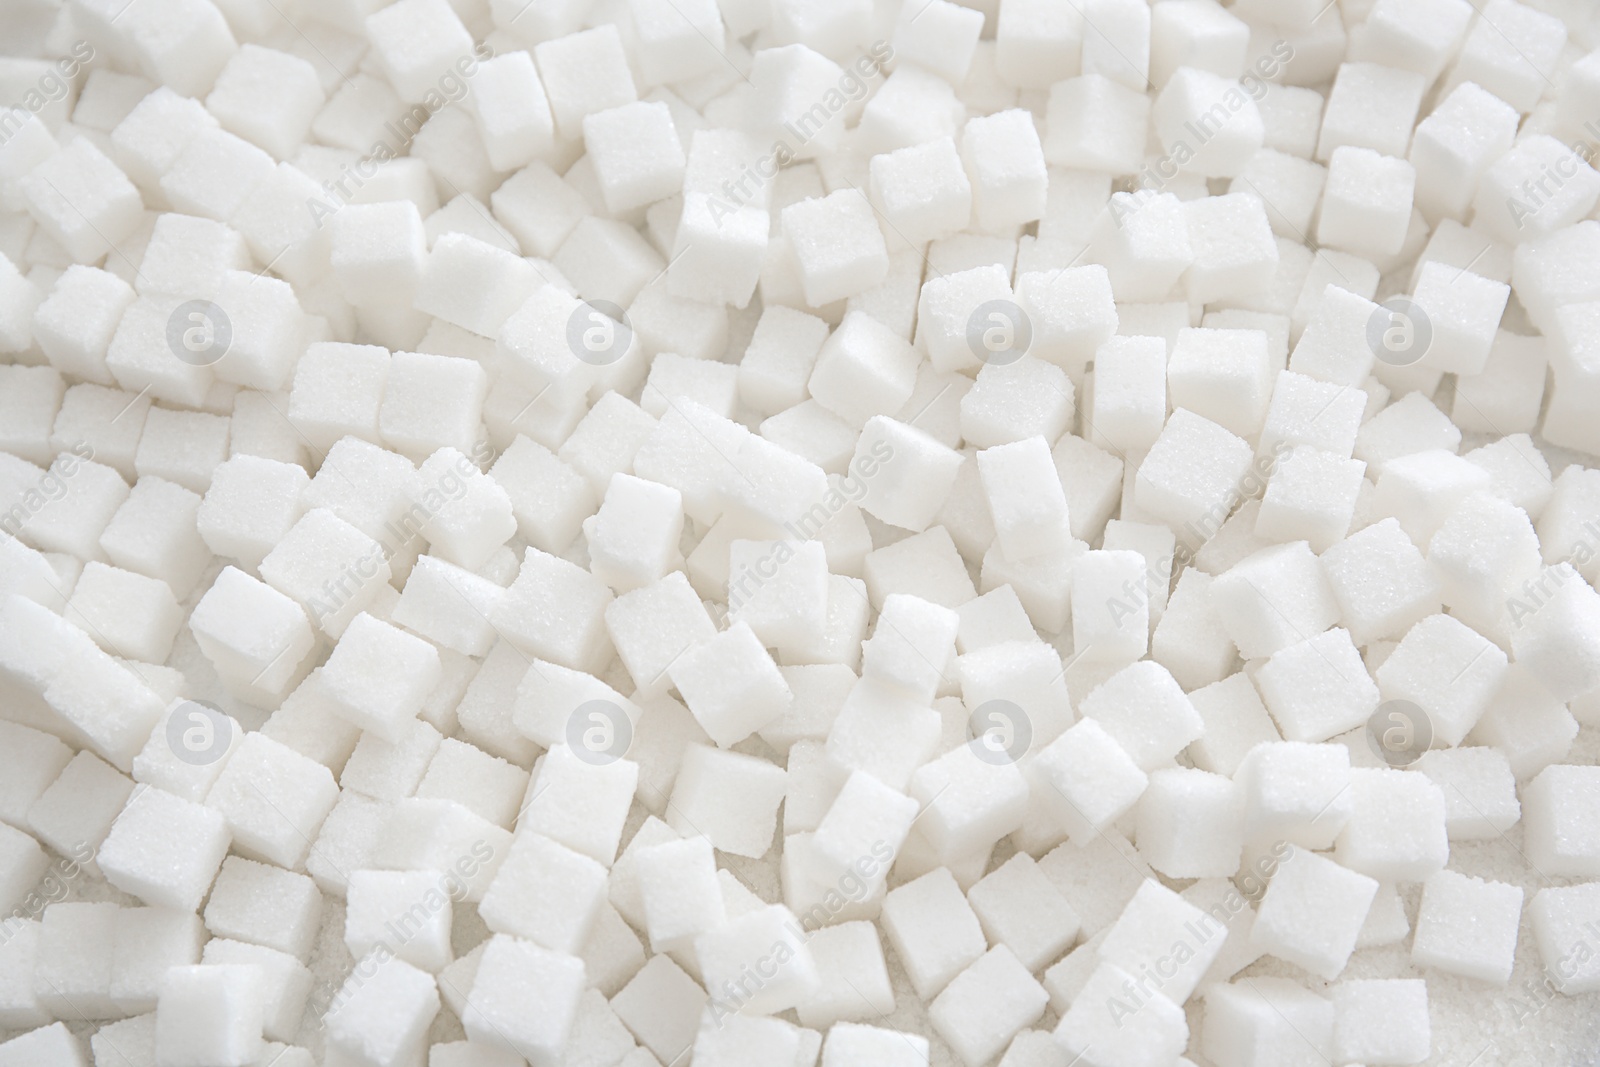 Photo of Refined sugar cubes as background, top view